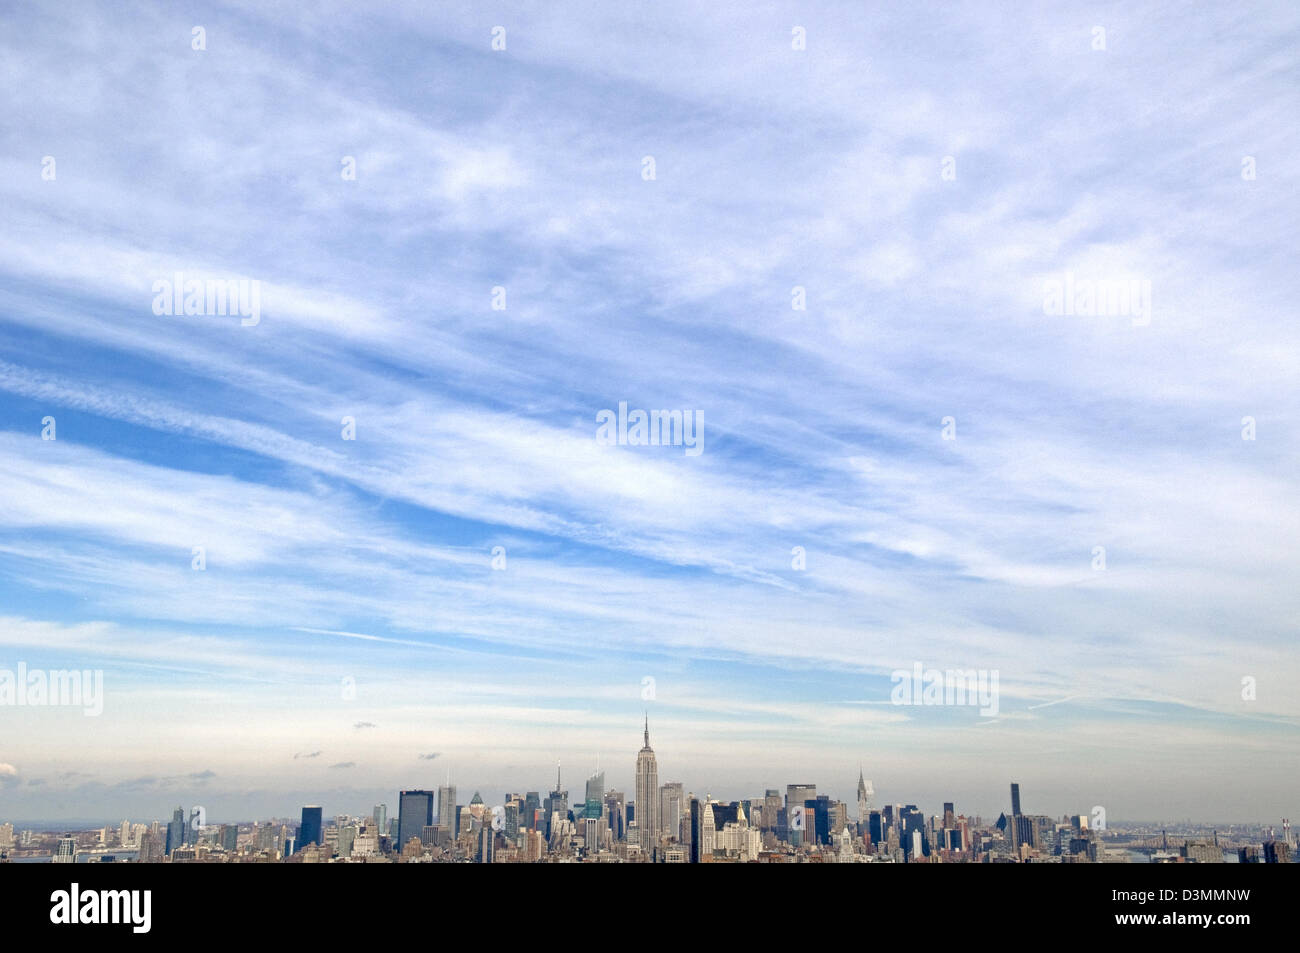 The New York City skyline looking north from the Financial District. Stock Photo